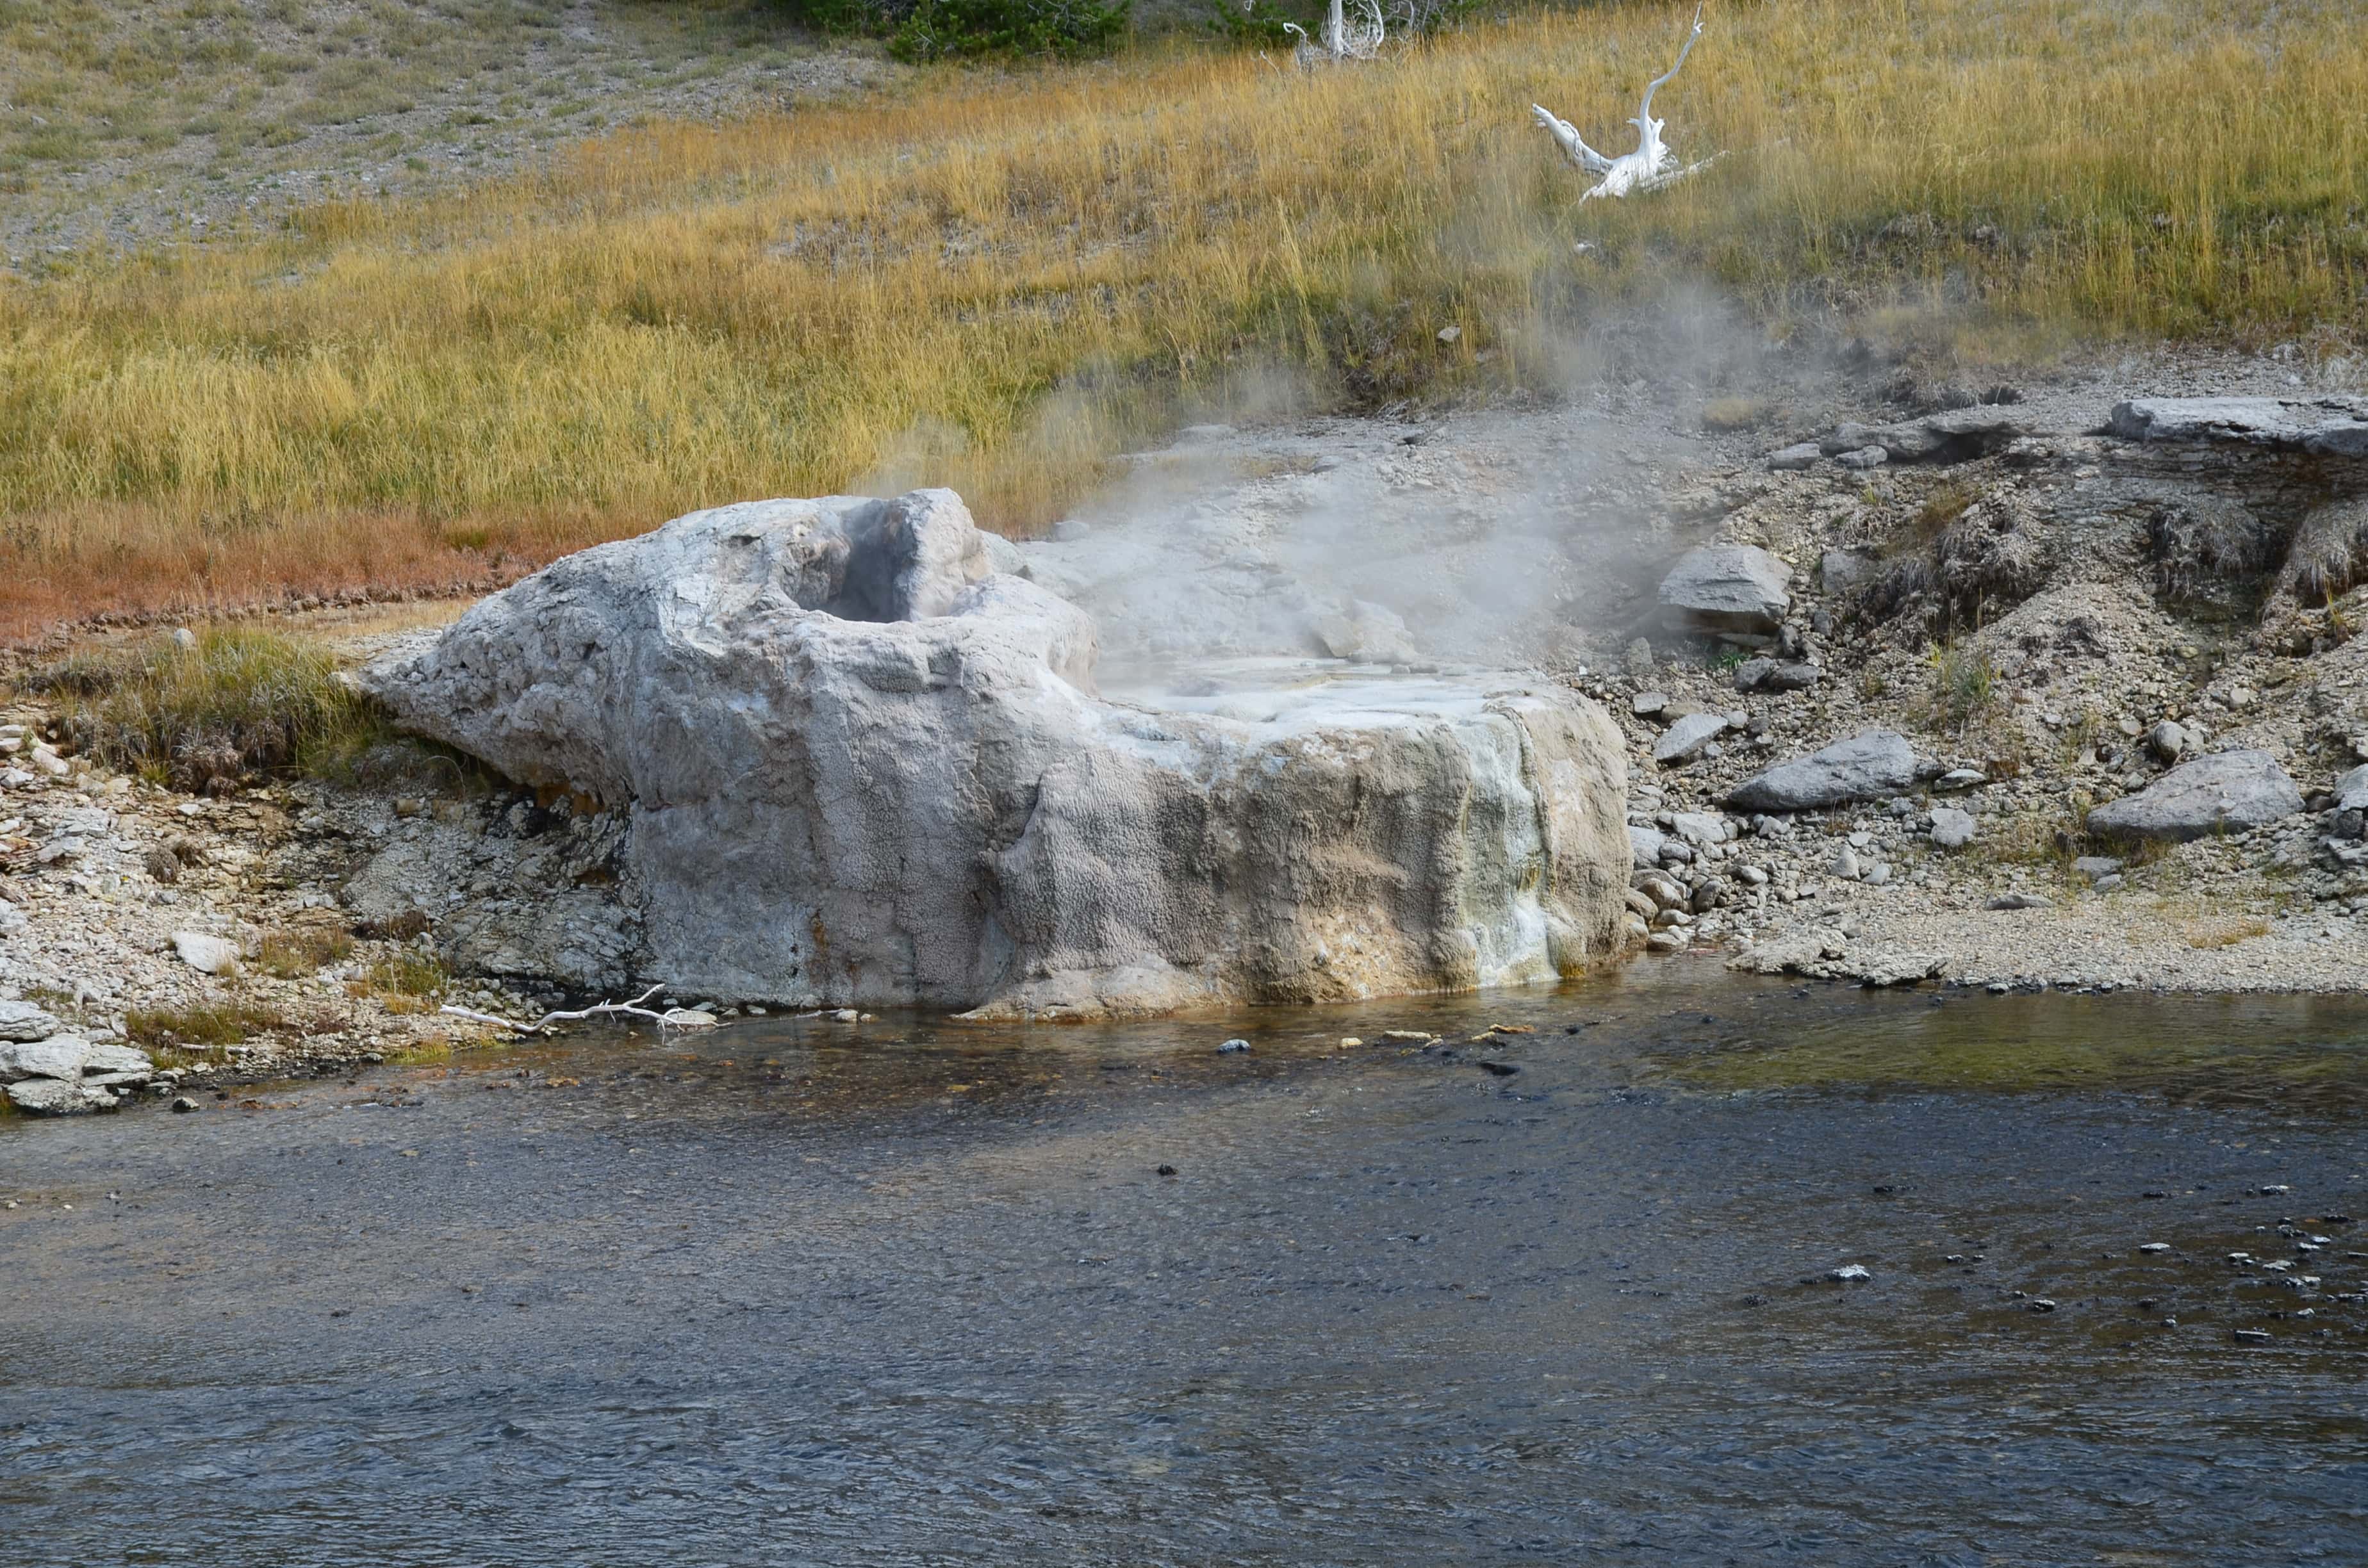 Riverside Geyser at the Upper Geyser Basin in Yellowstone National Park, Wyoming